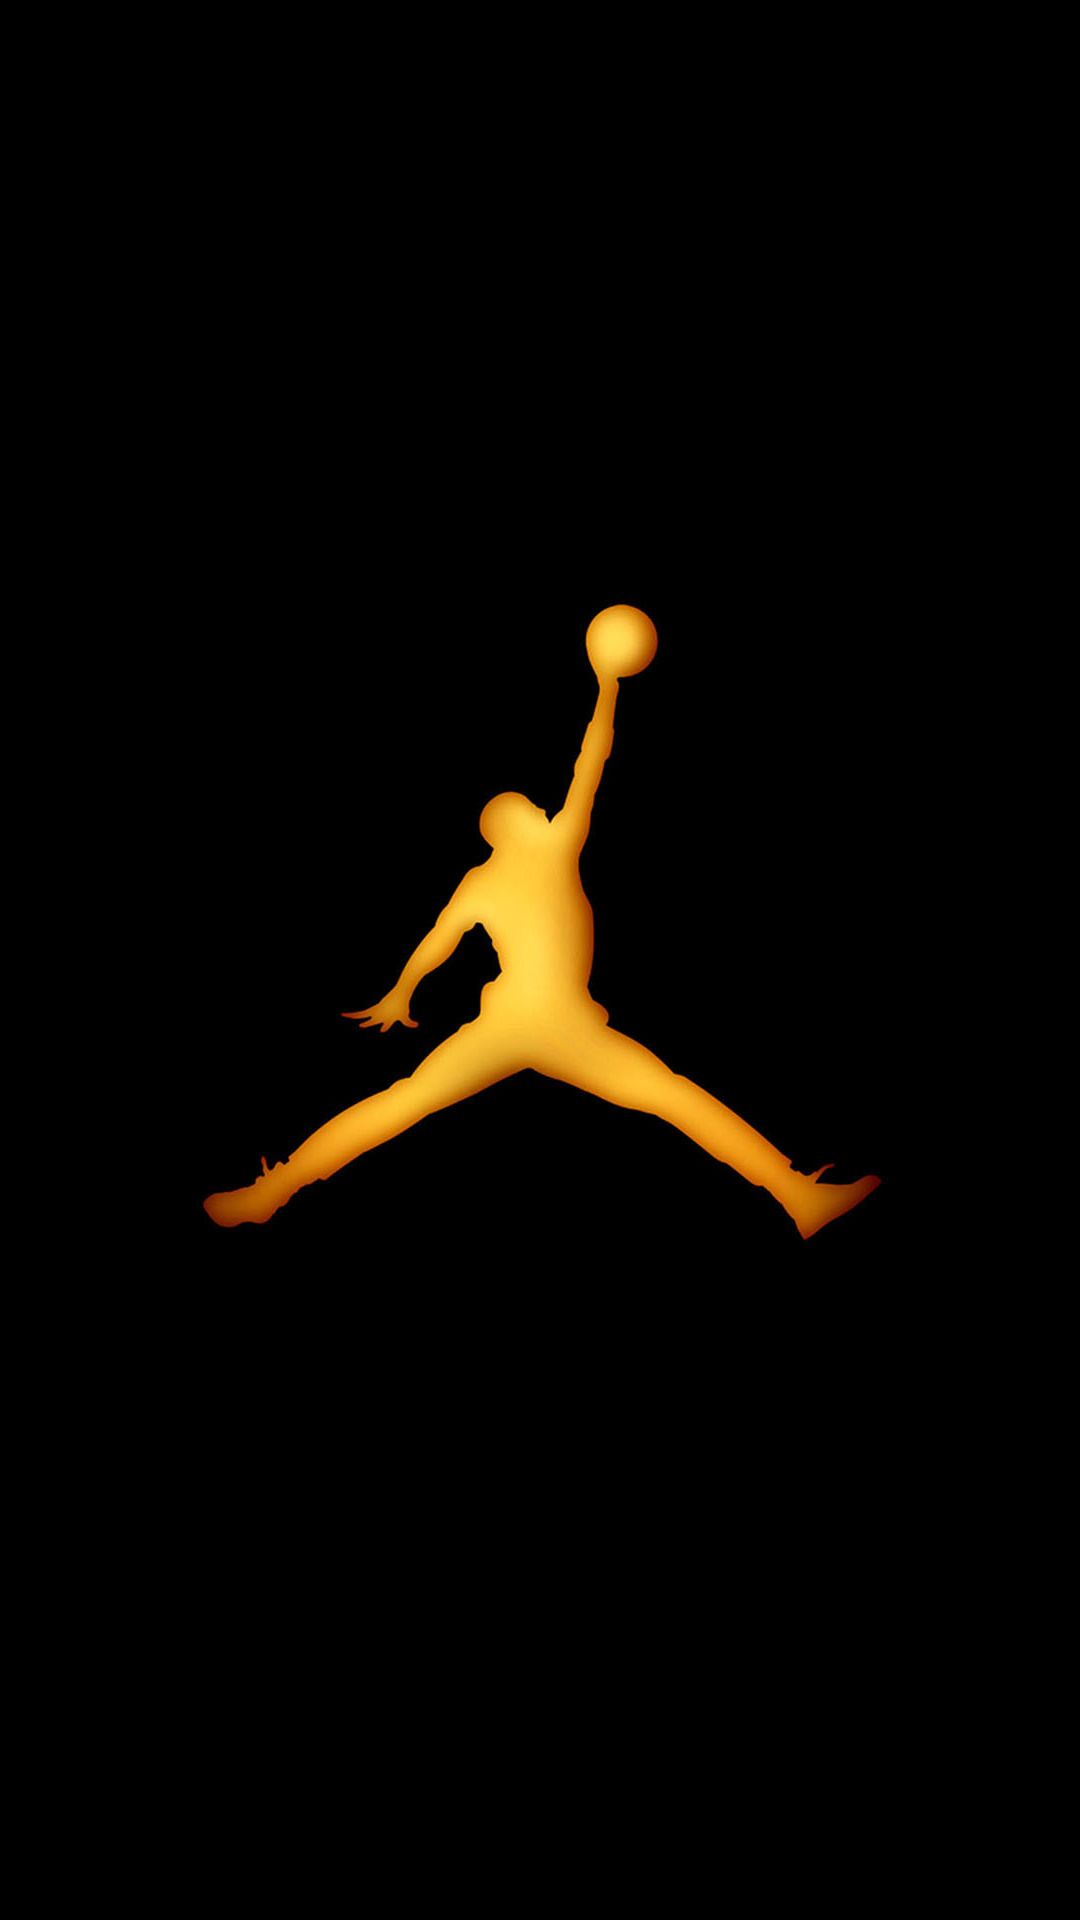 Basketball Sport Layup Outline iPhone 8 Wallpaper Free Download